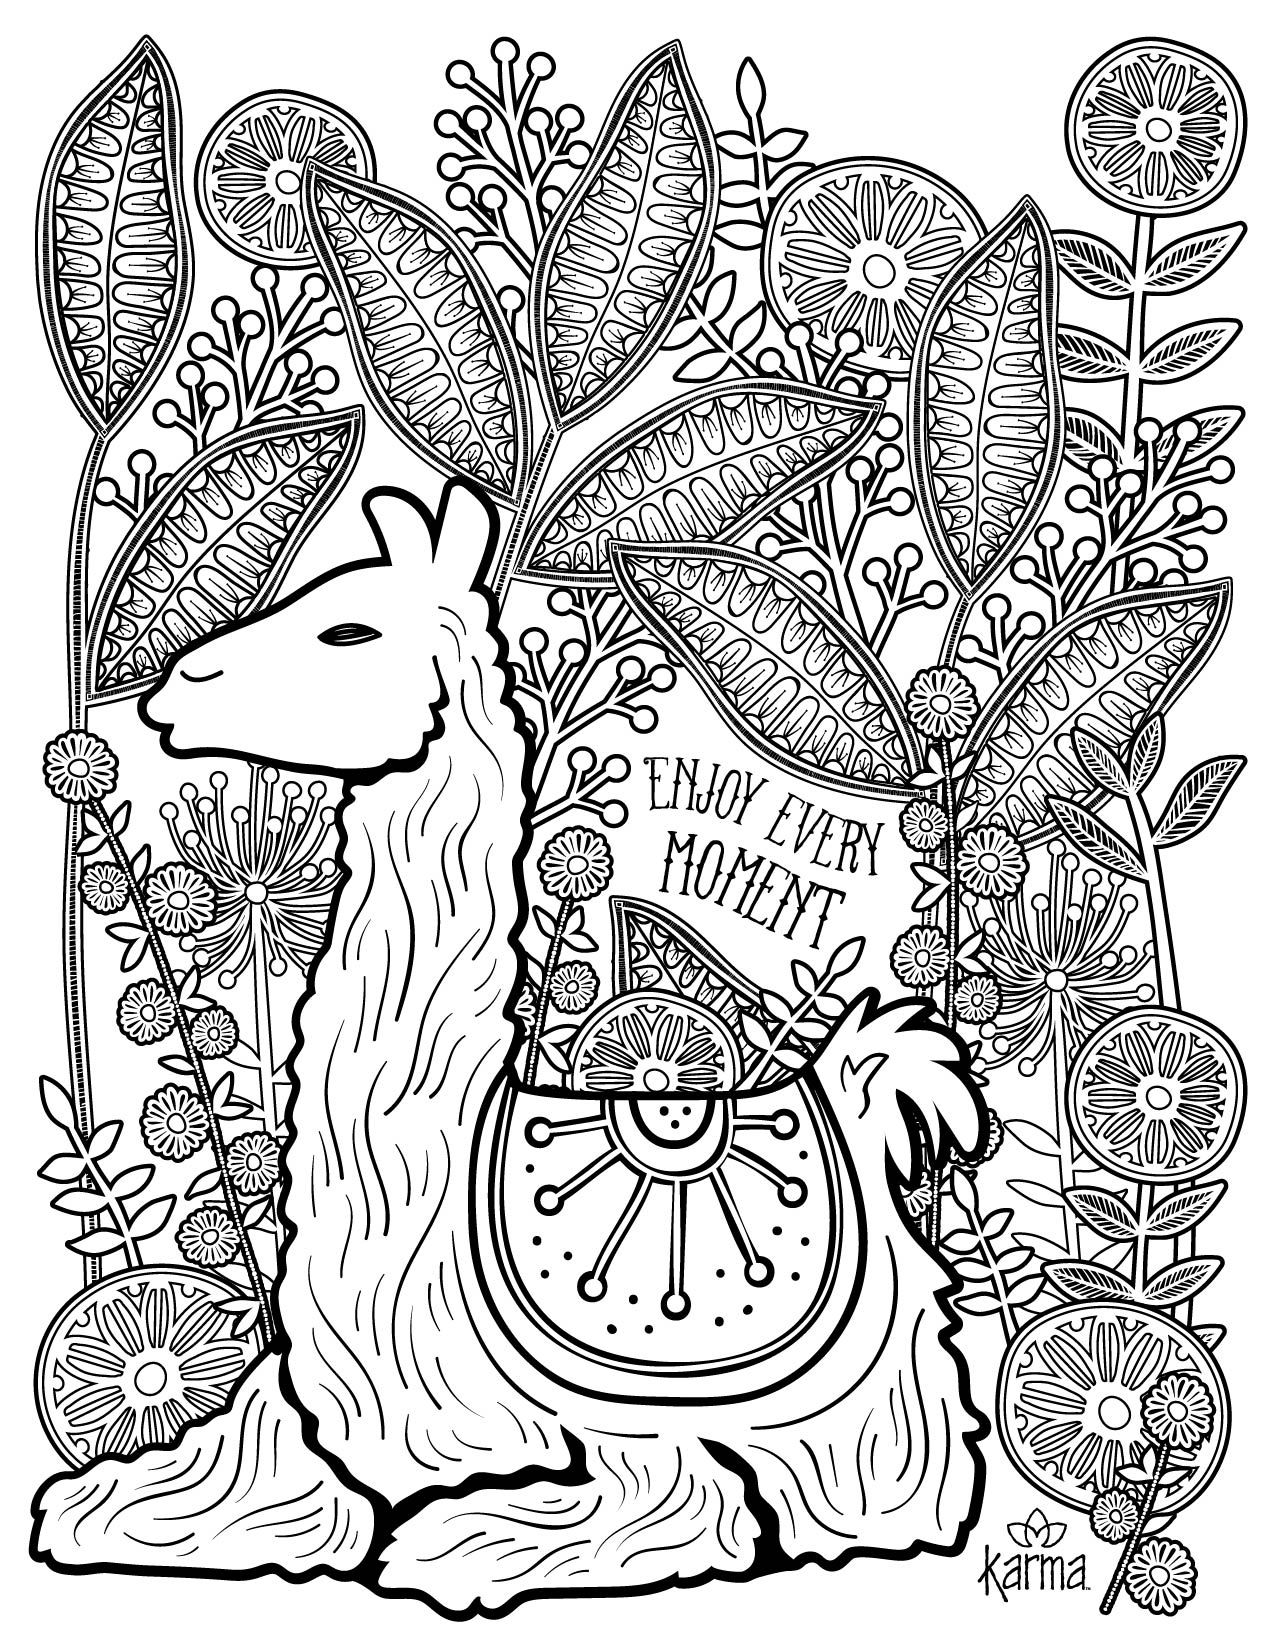 Llama! Free and printable coloring page by Karma Gifts | Bird coloring pages,  Kids printable coloring pages, Coloring pages